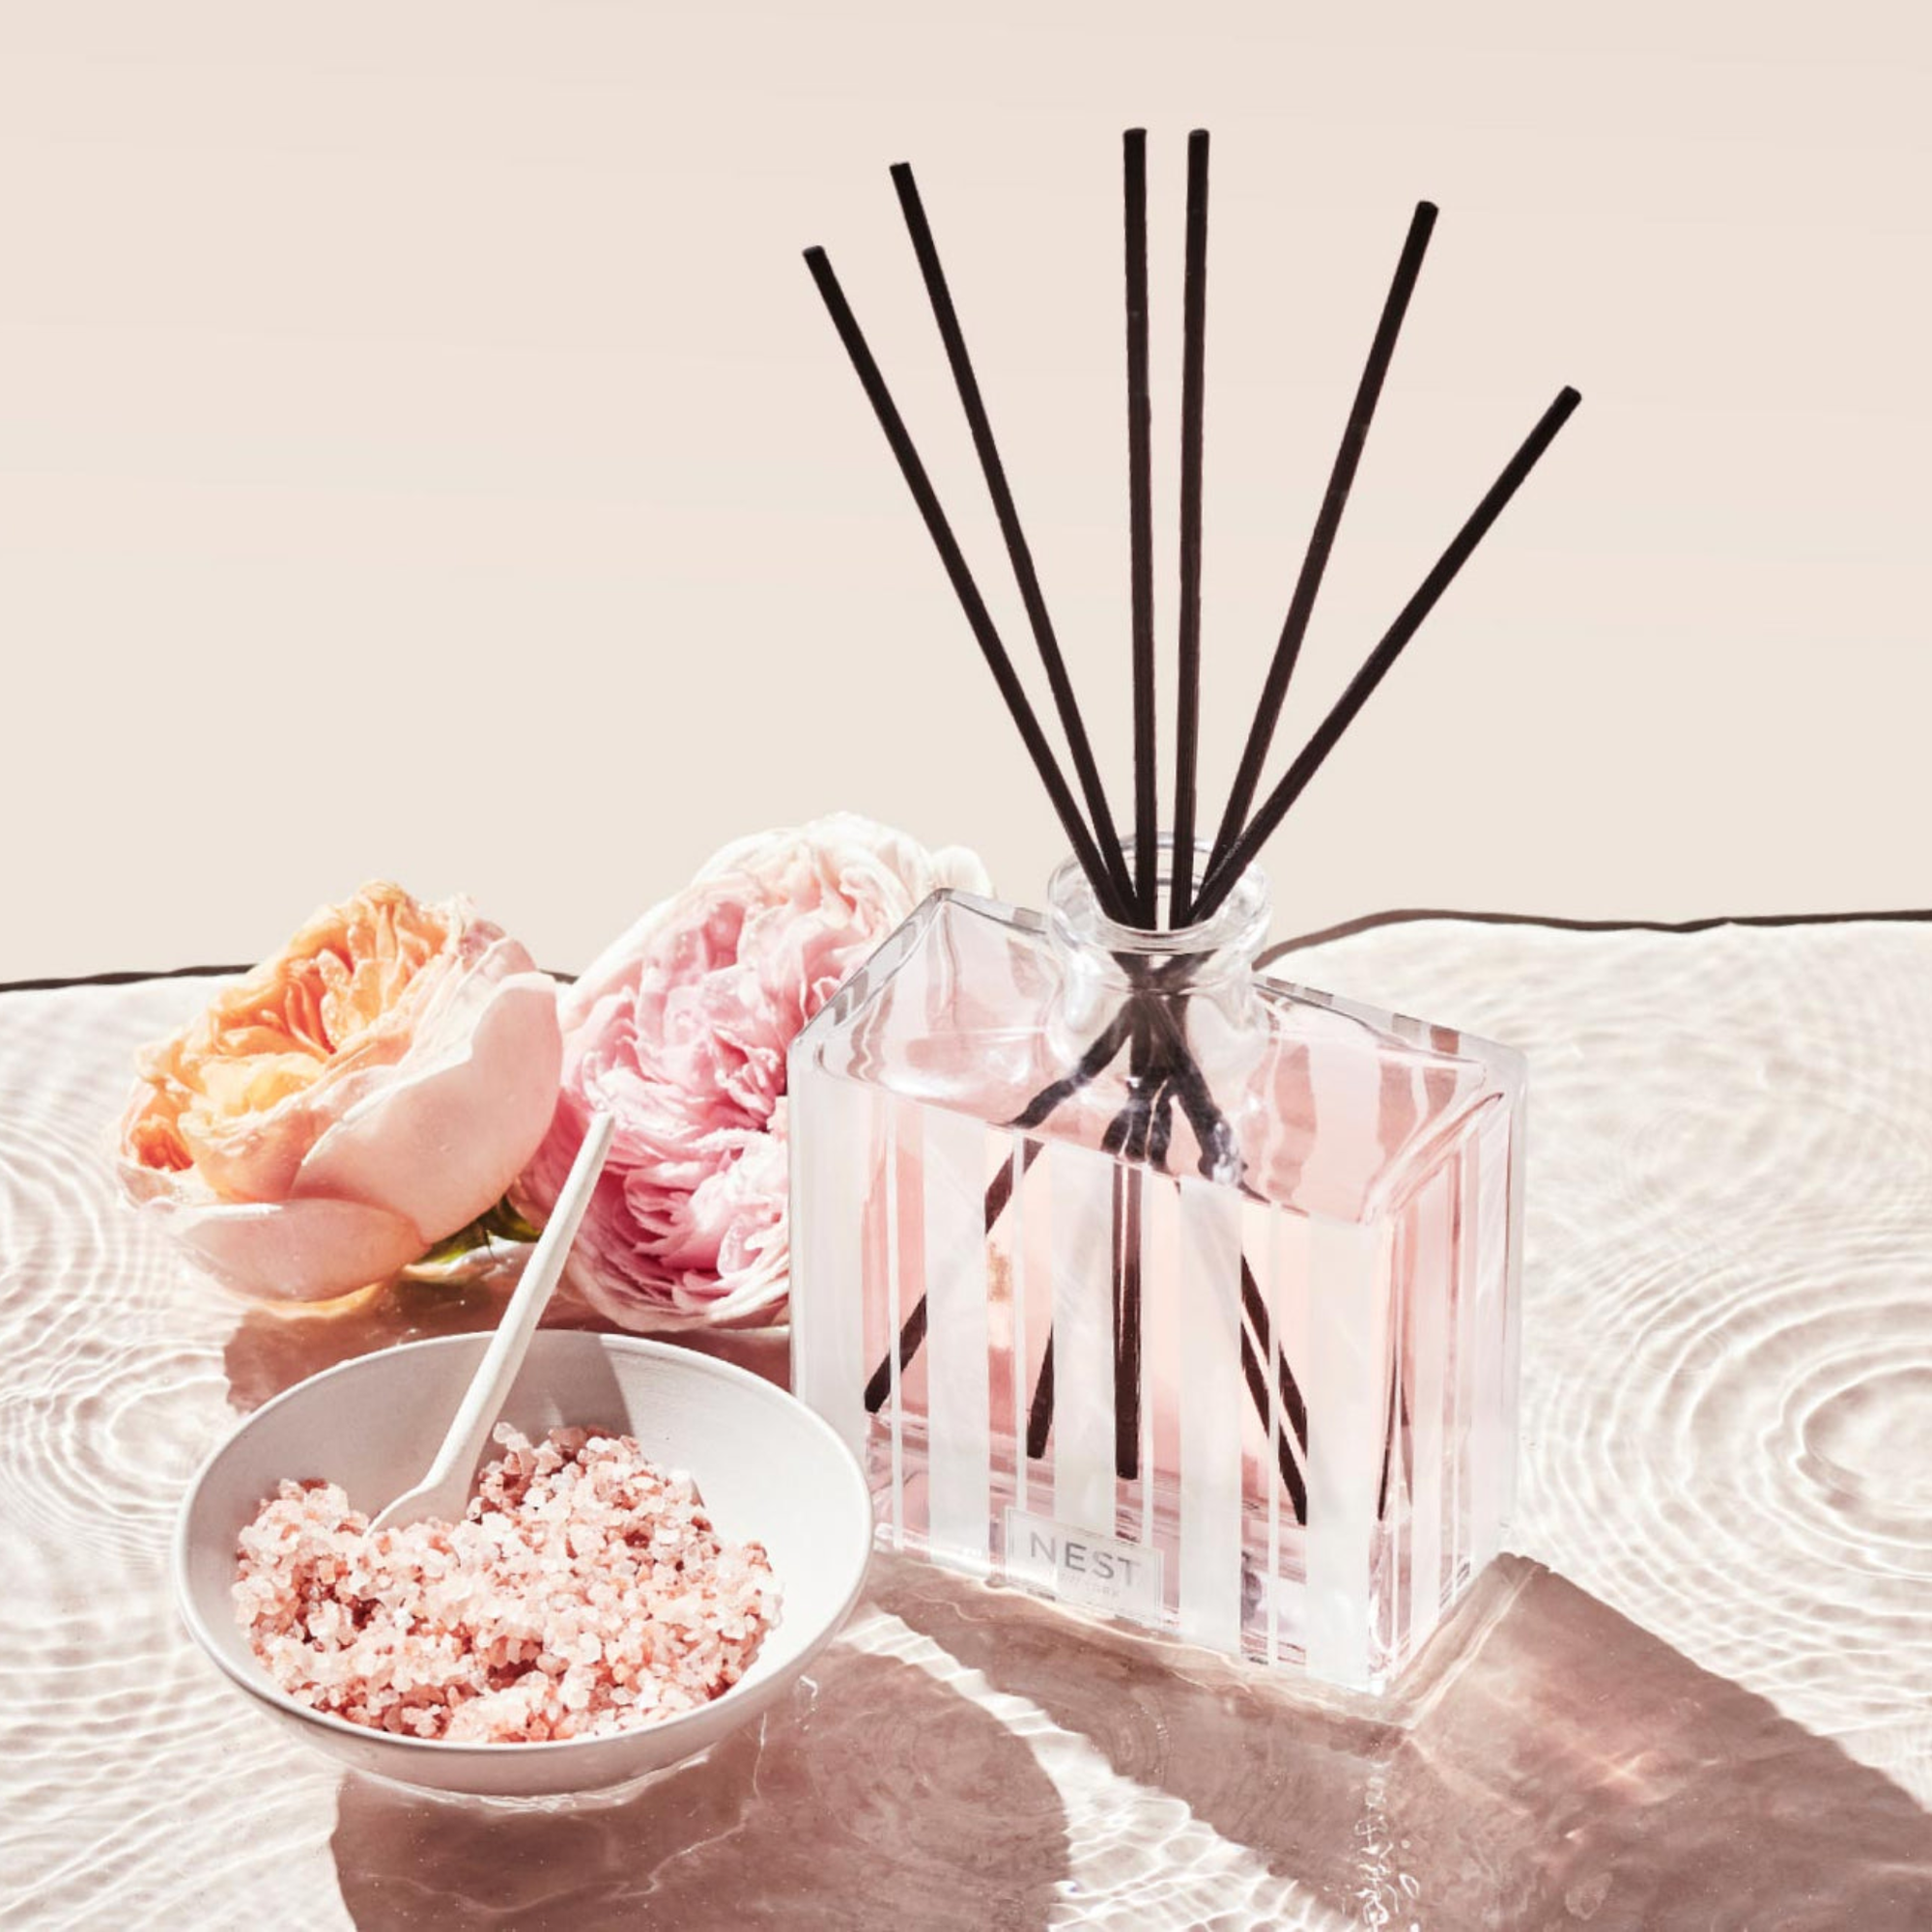 Nest New York Himalayan Salt & Rosewater Reed Diffuser Lifestyle with Flowers on Counter